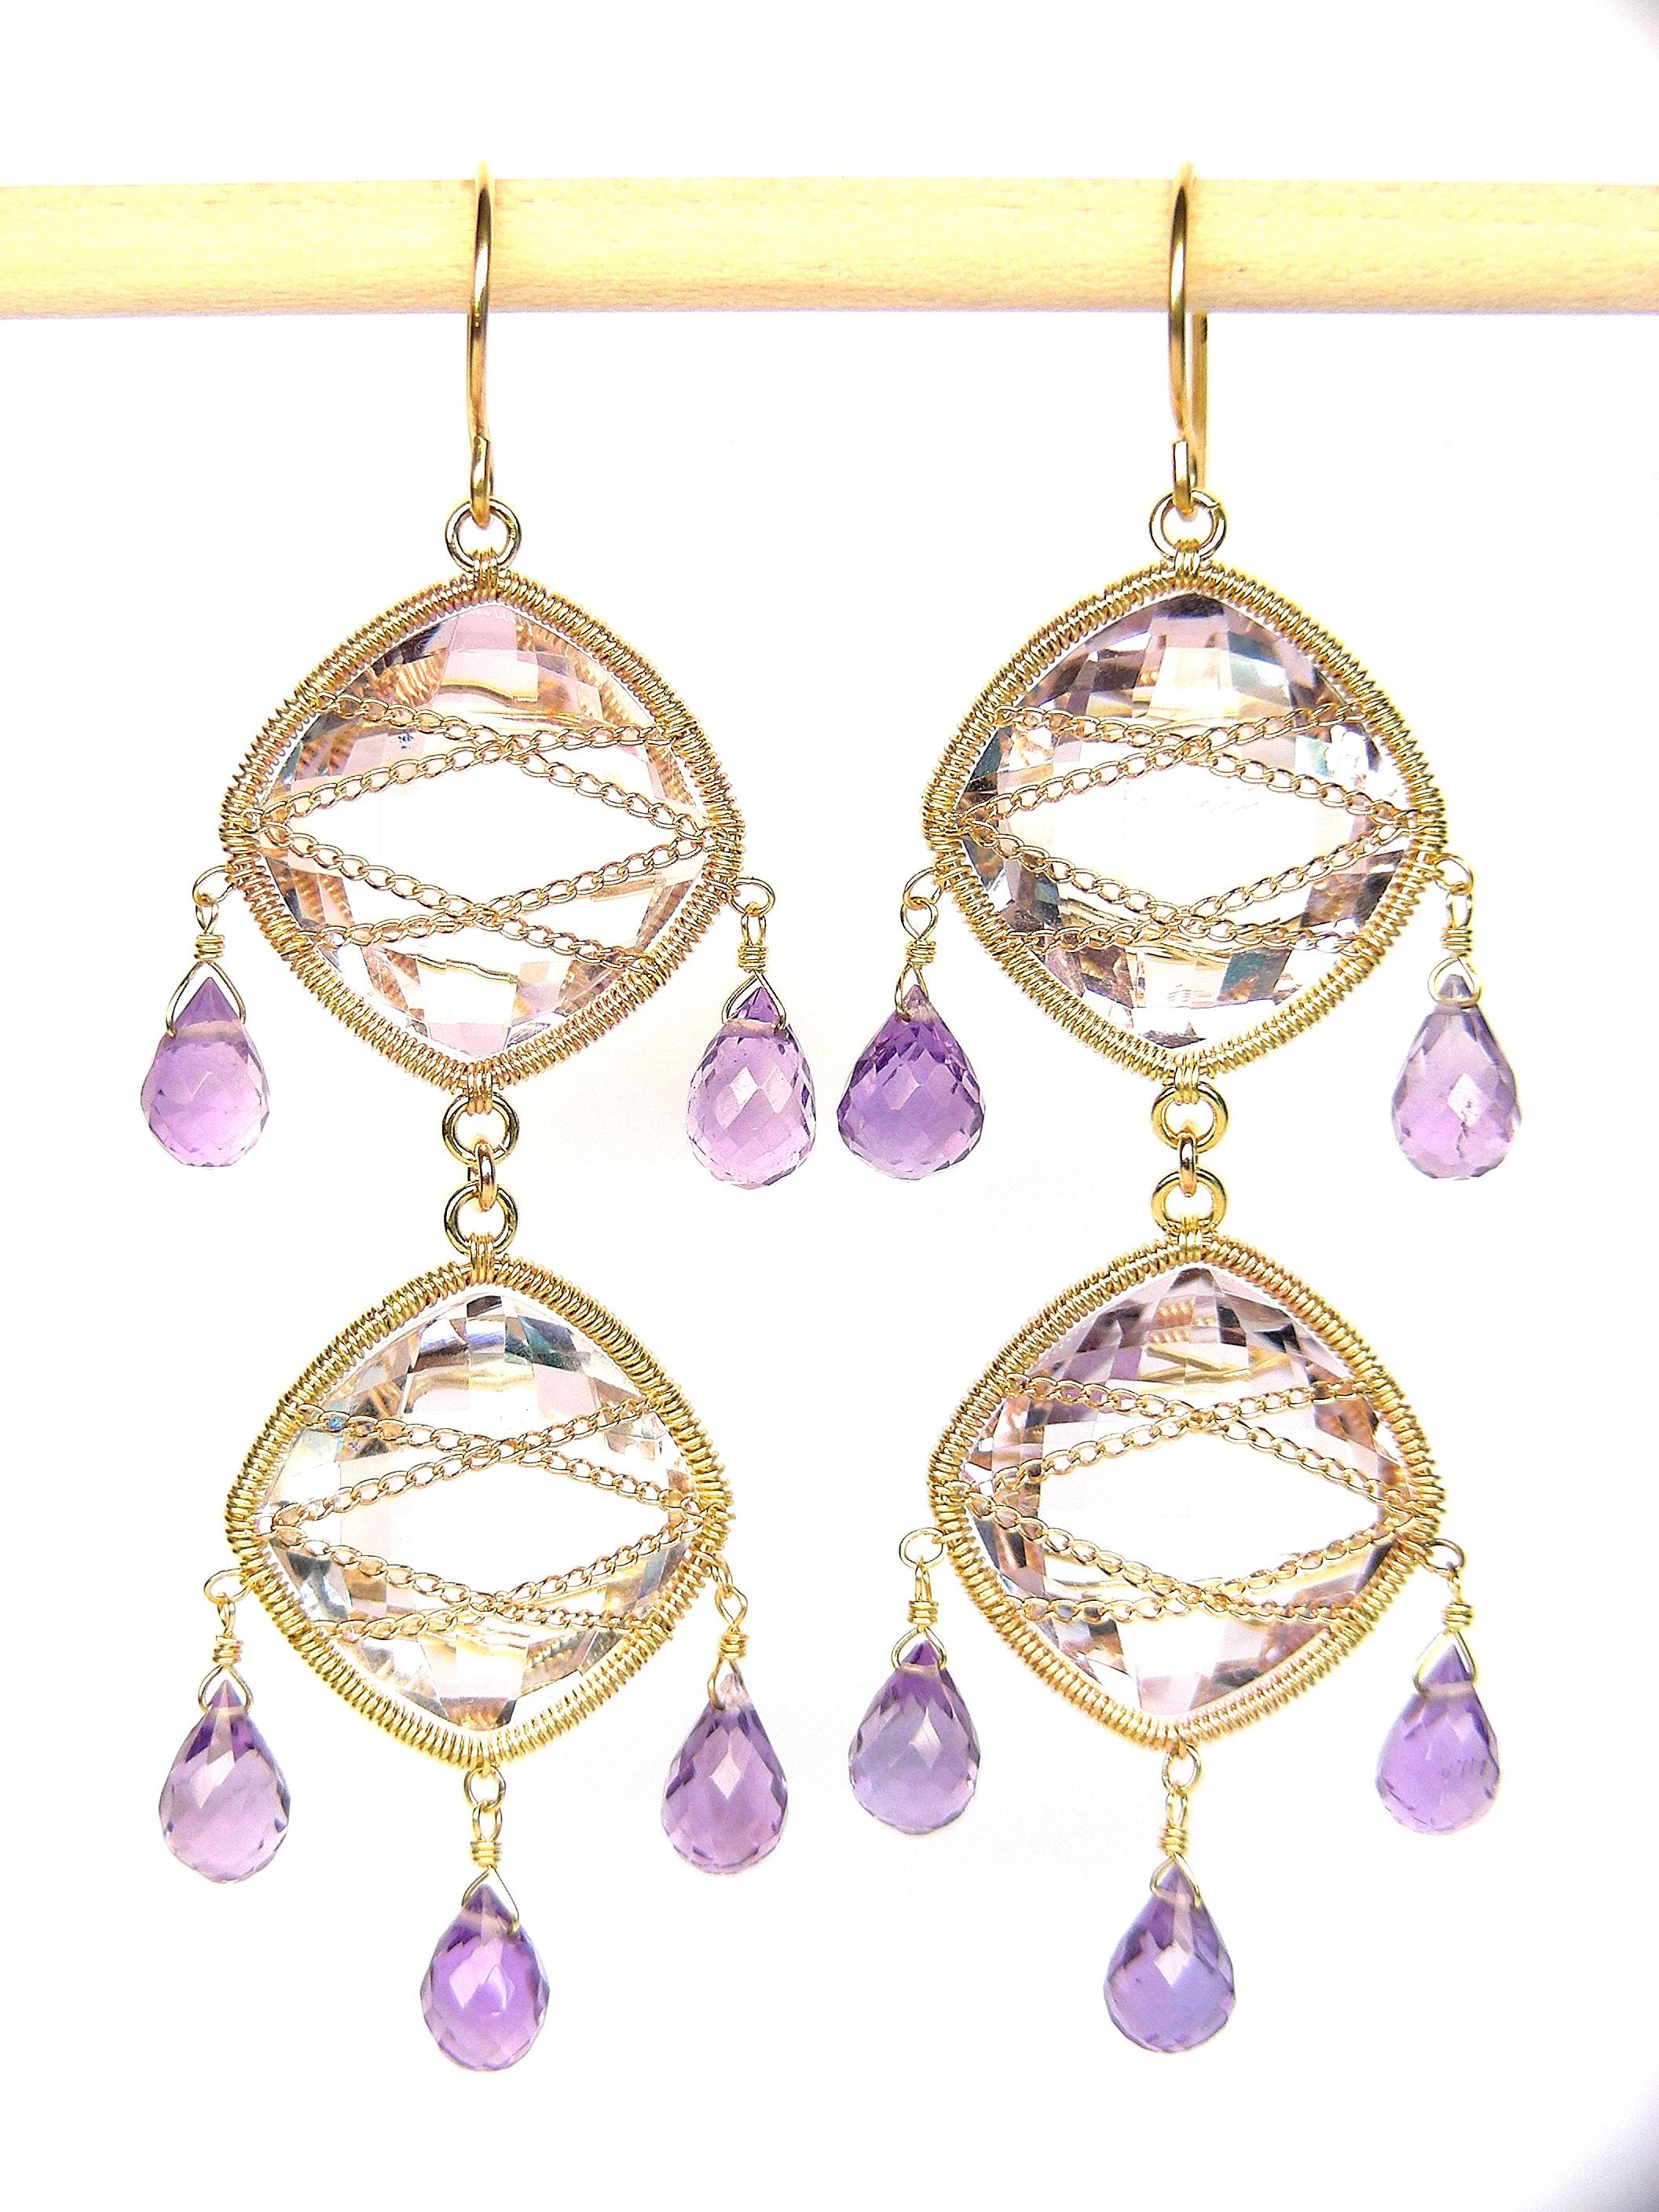 Hoop 18k Yellow Gold Earrings with crystals and amethysts
Summer Splash is a collection of easy to wear, fashion oriented hoop earrings to wear with lightness, chic and glam only this pieces for this collection 
They come in 6 variations of